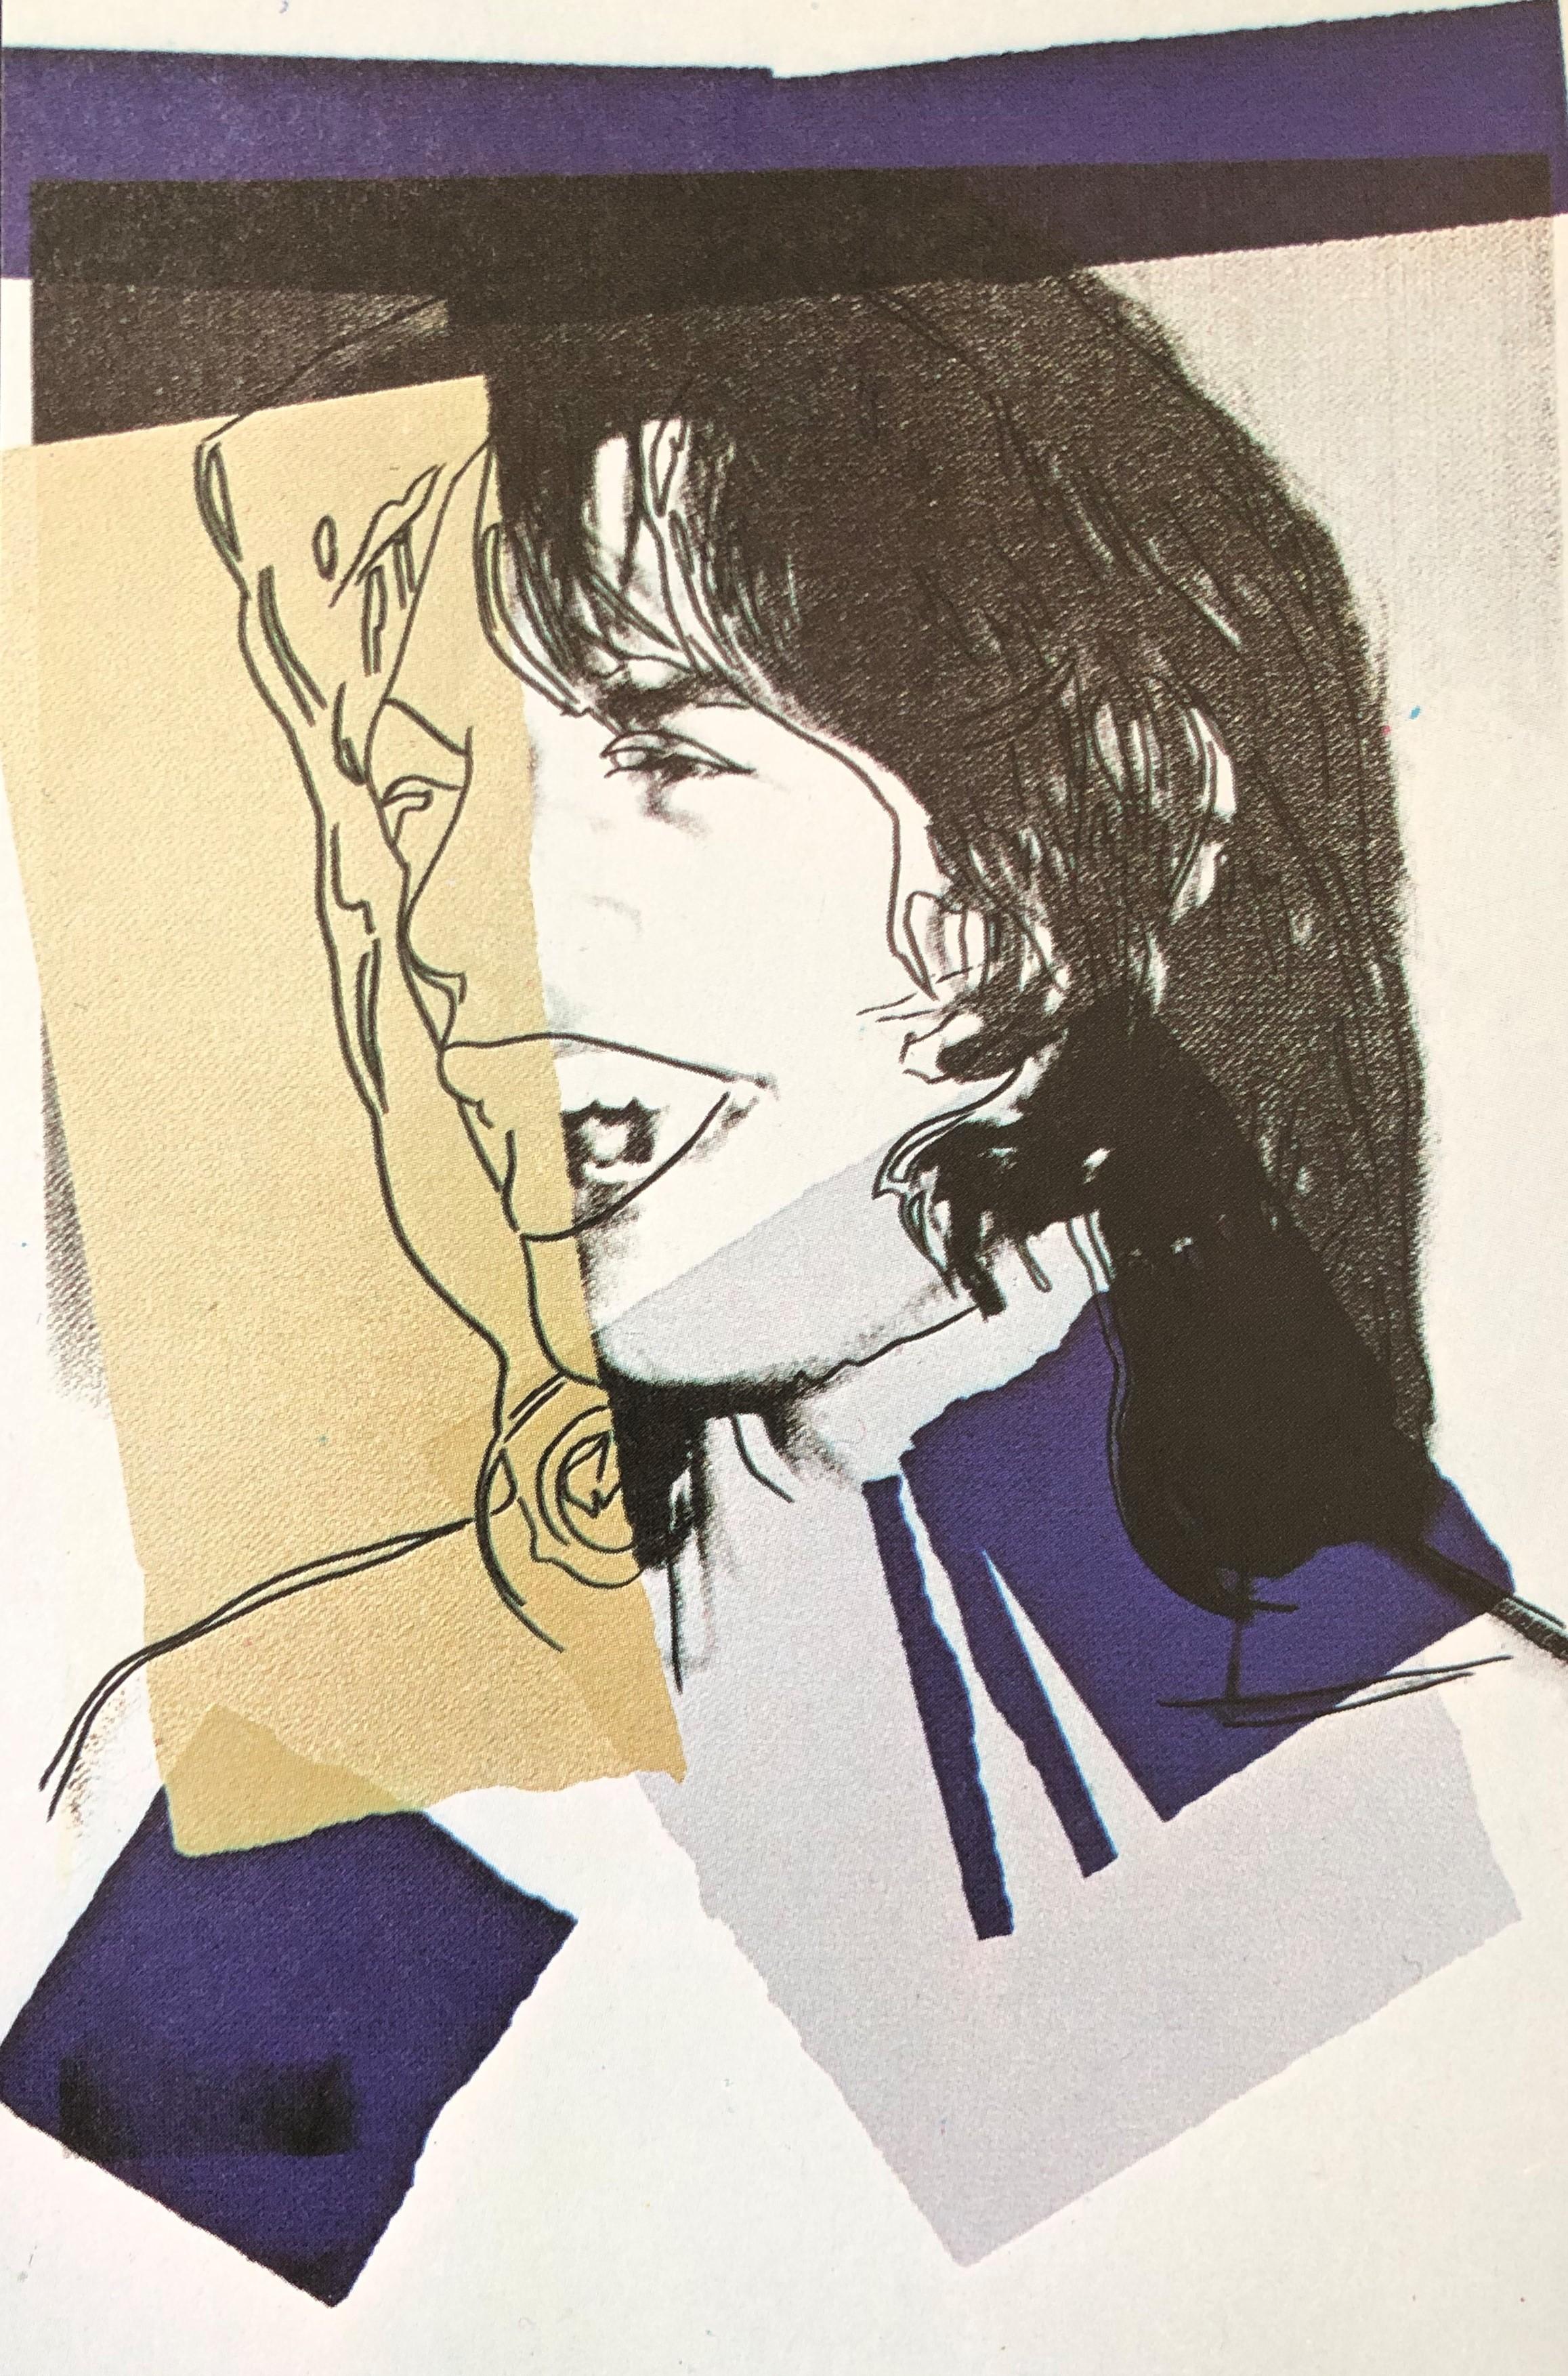 Mick Jagger VI - Andy Warhol, Announcement card, Rolling Stones, Musician, Pop